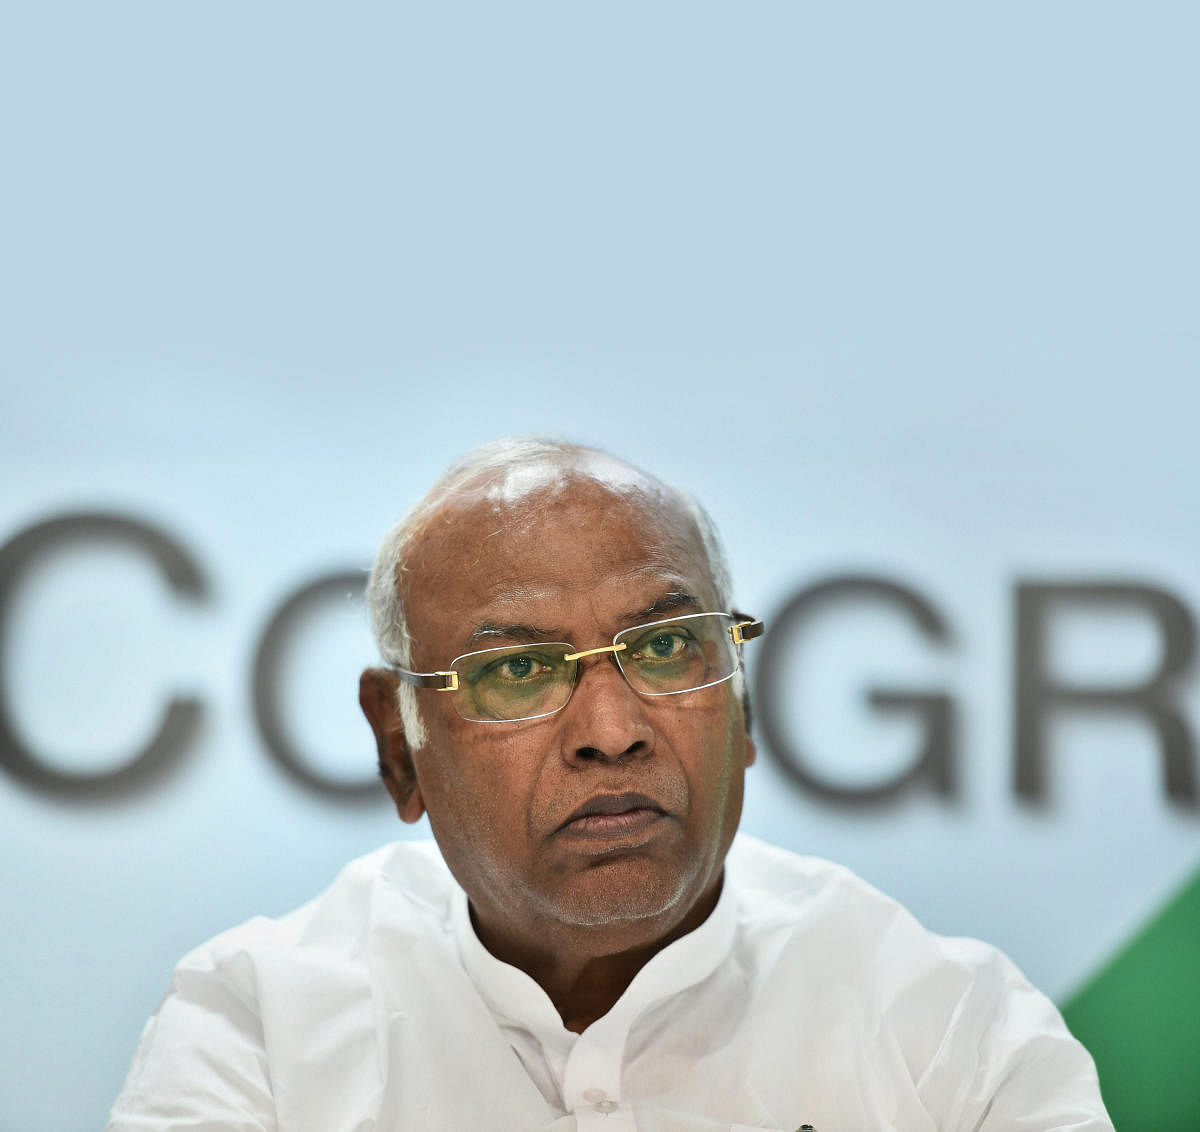 I-T raids carried out to unleash fear: Kharge